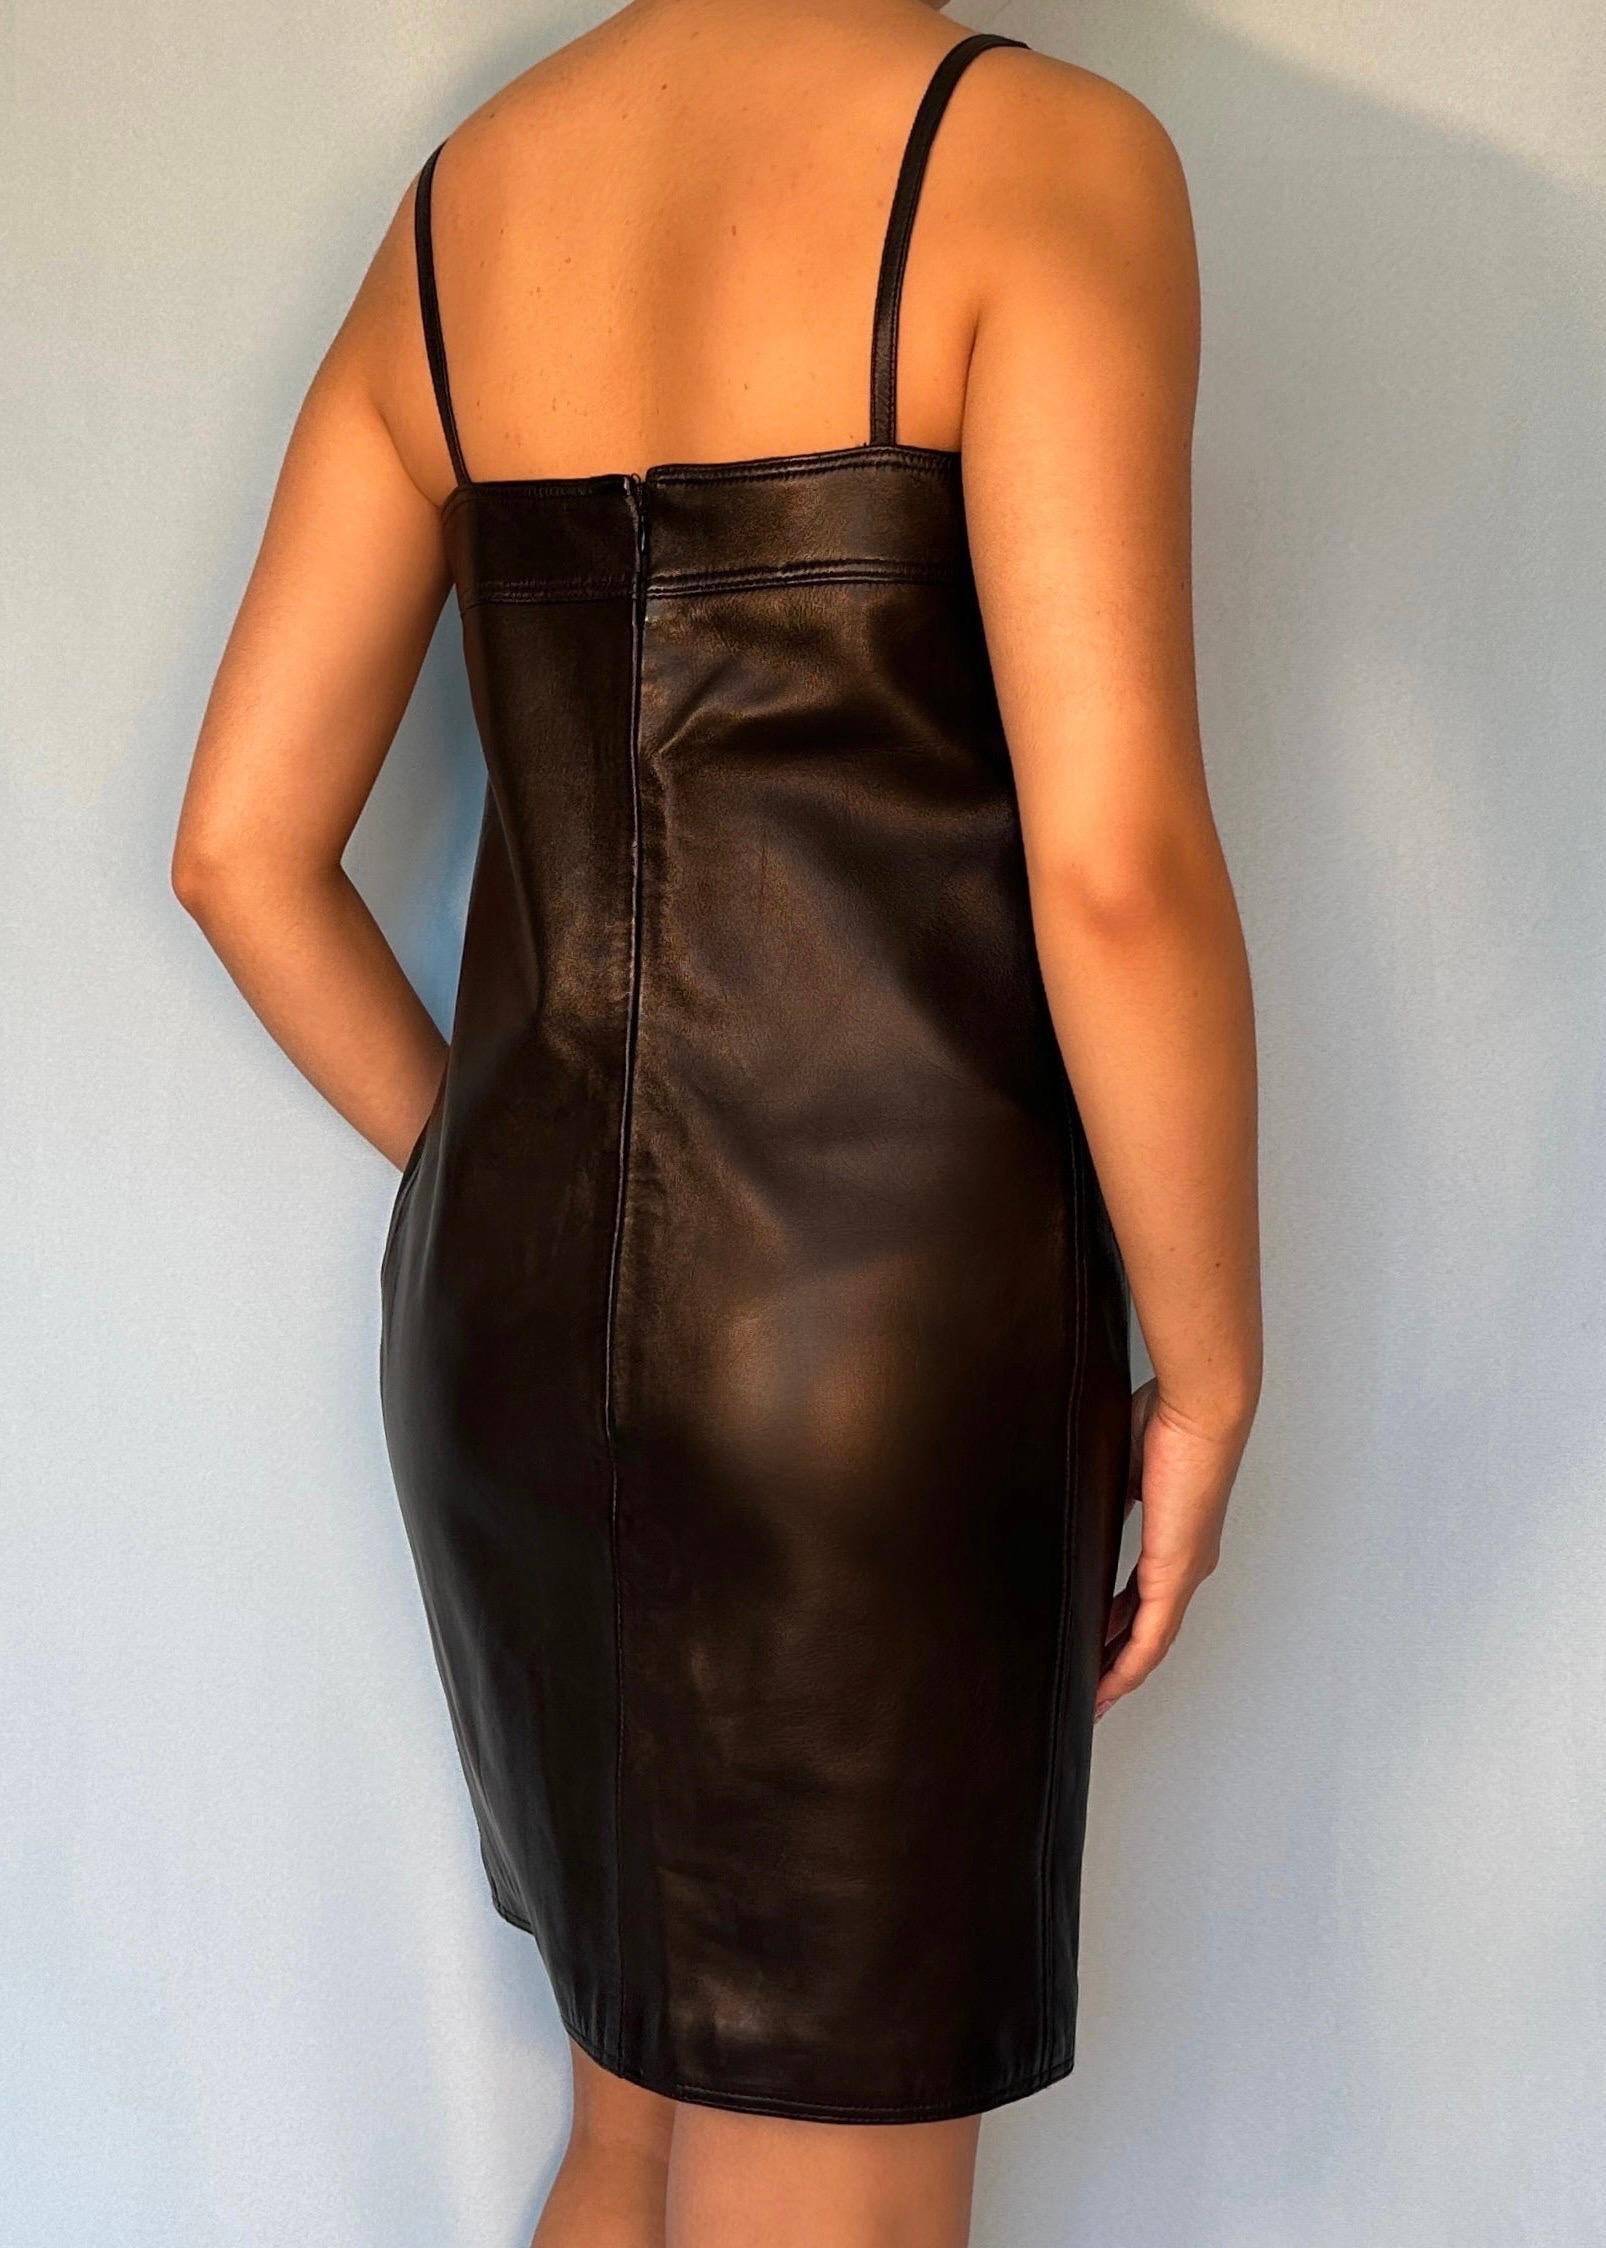 Versace Fall 1997 Runway Black Leather Mini Dress In Good Condition For Sale In Hertfordshire, GB